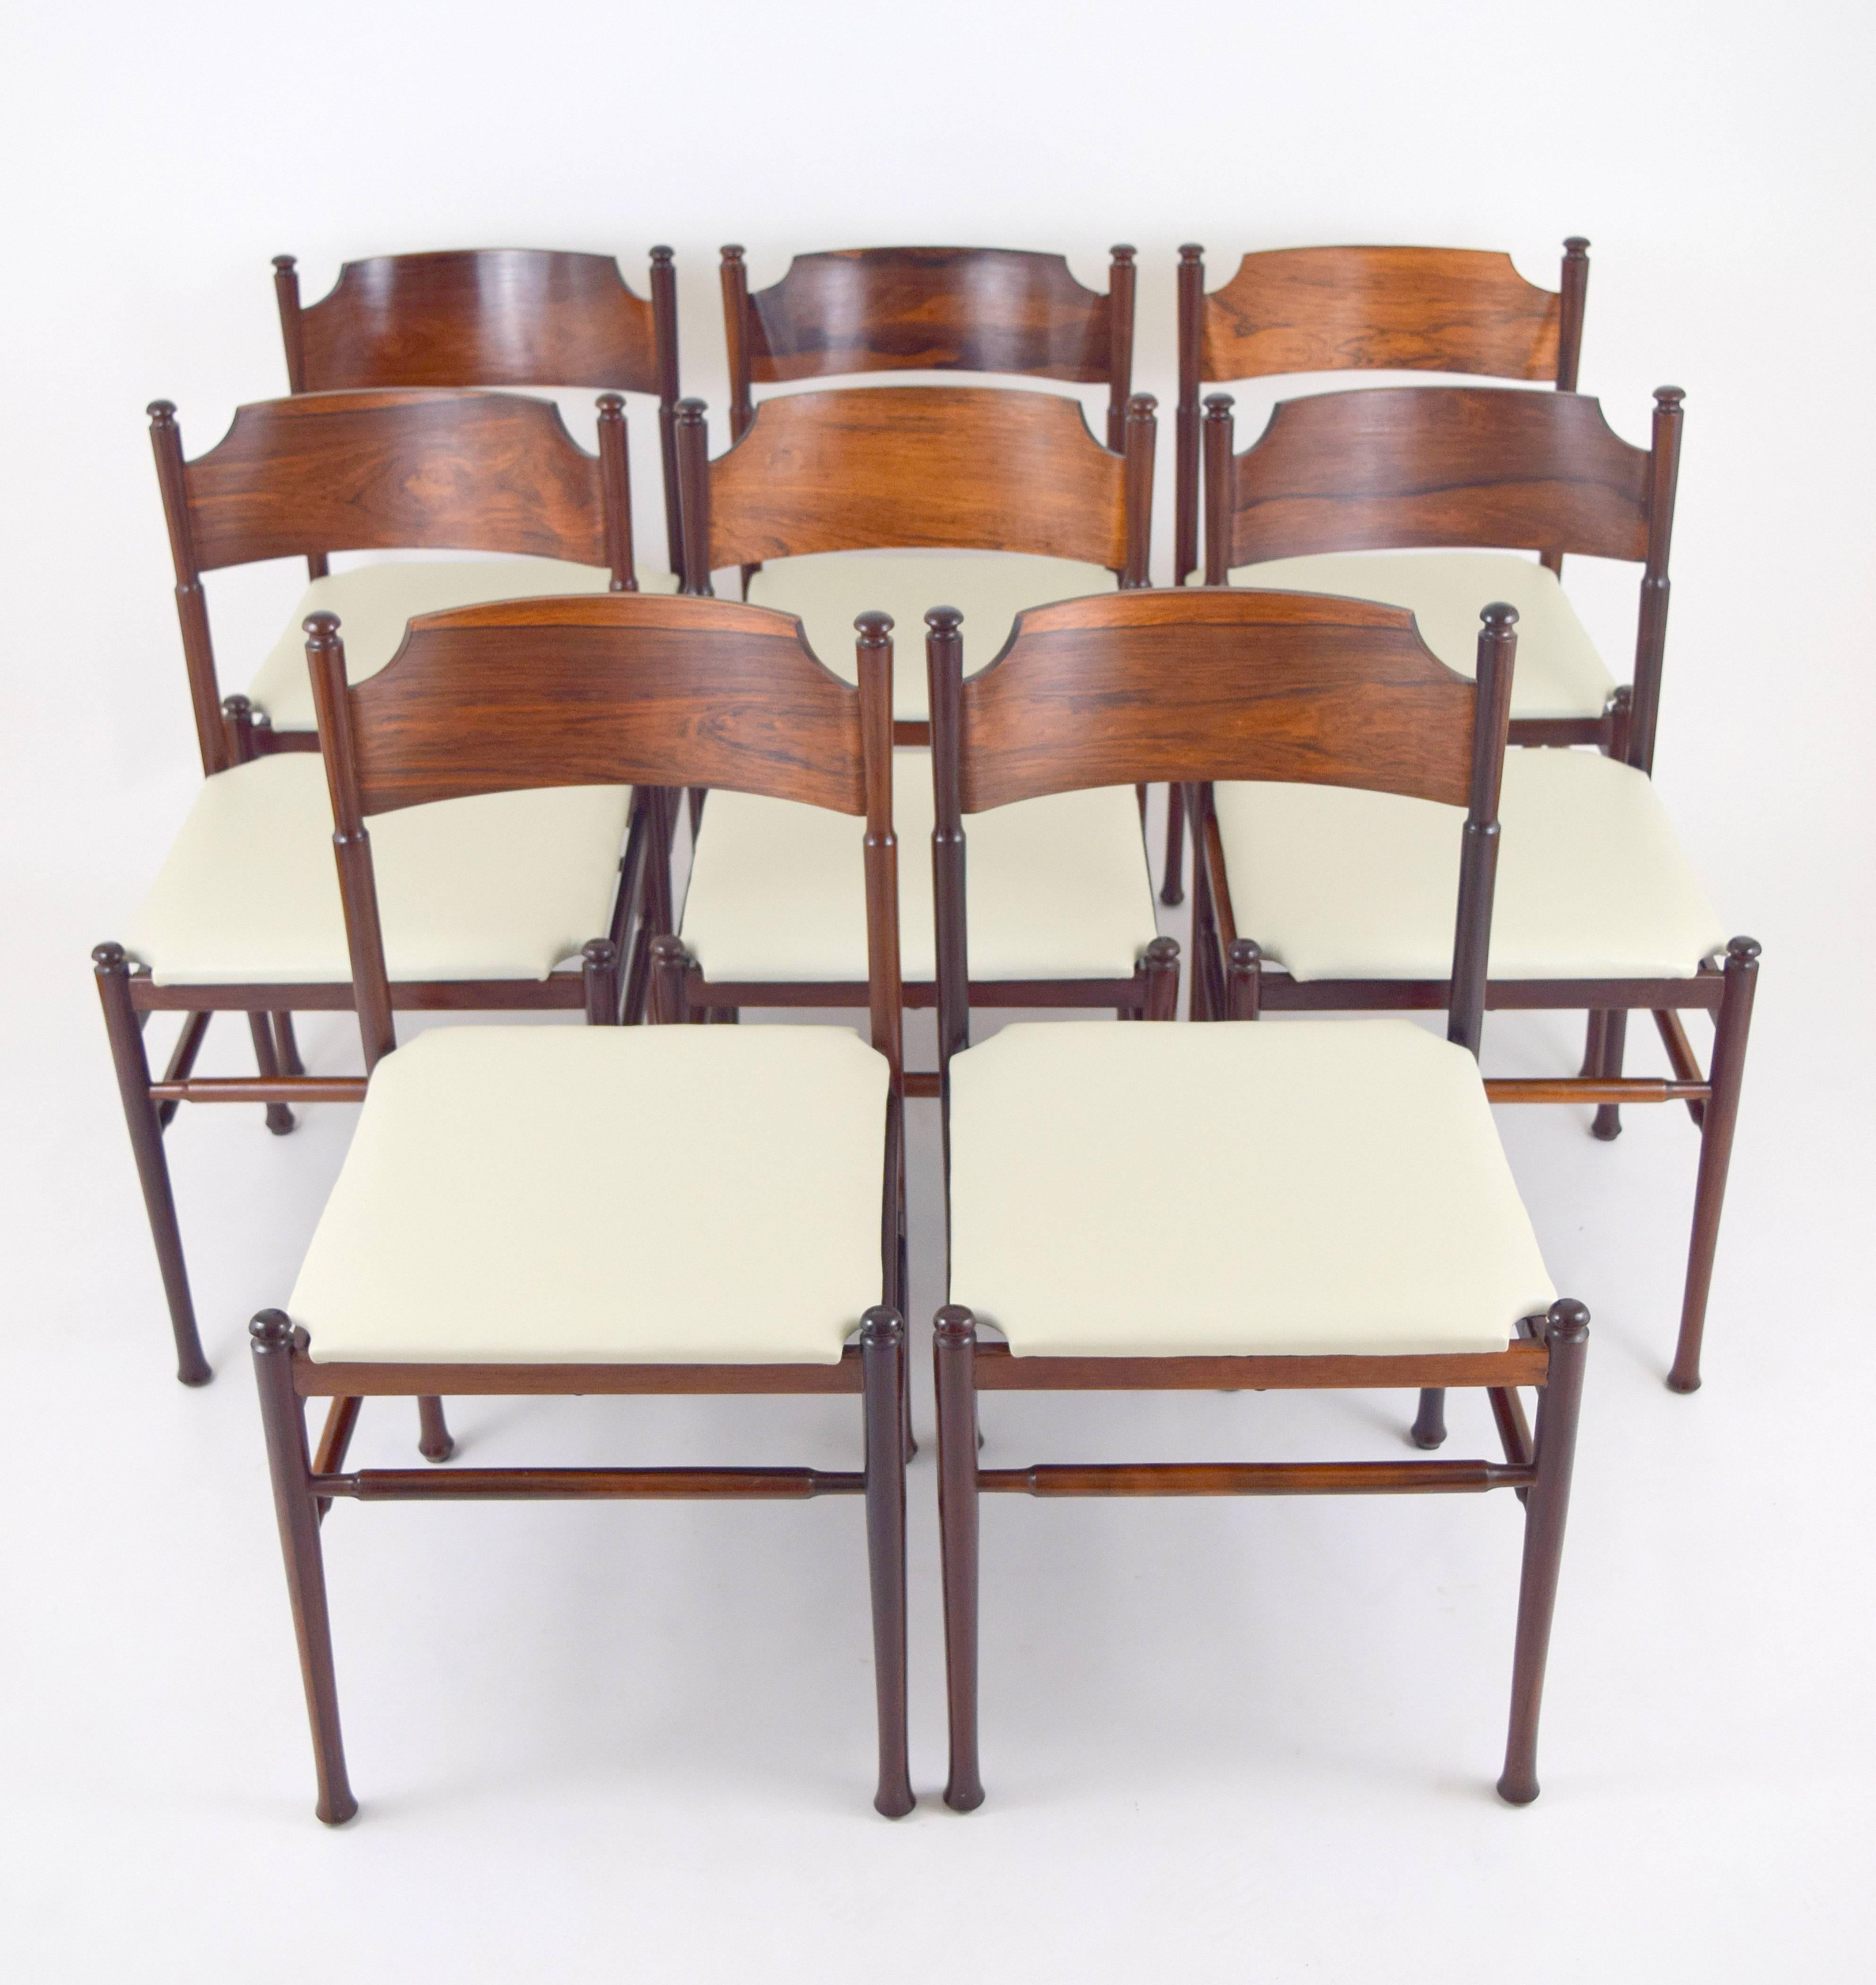 Elegant set of eight rosewood dining chairs in the manner of Osvaldo Borsani. Delicate and light in scale with turned elements and curved plywood backs. Each has a handmade quality with slight variations in wood thickness on backs. Newly upholstered